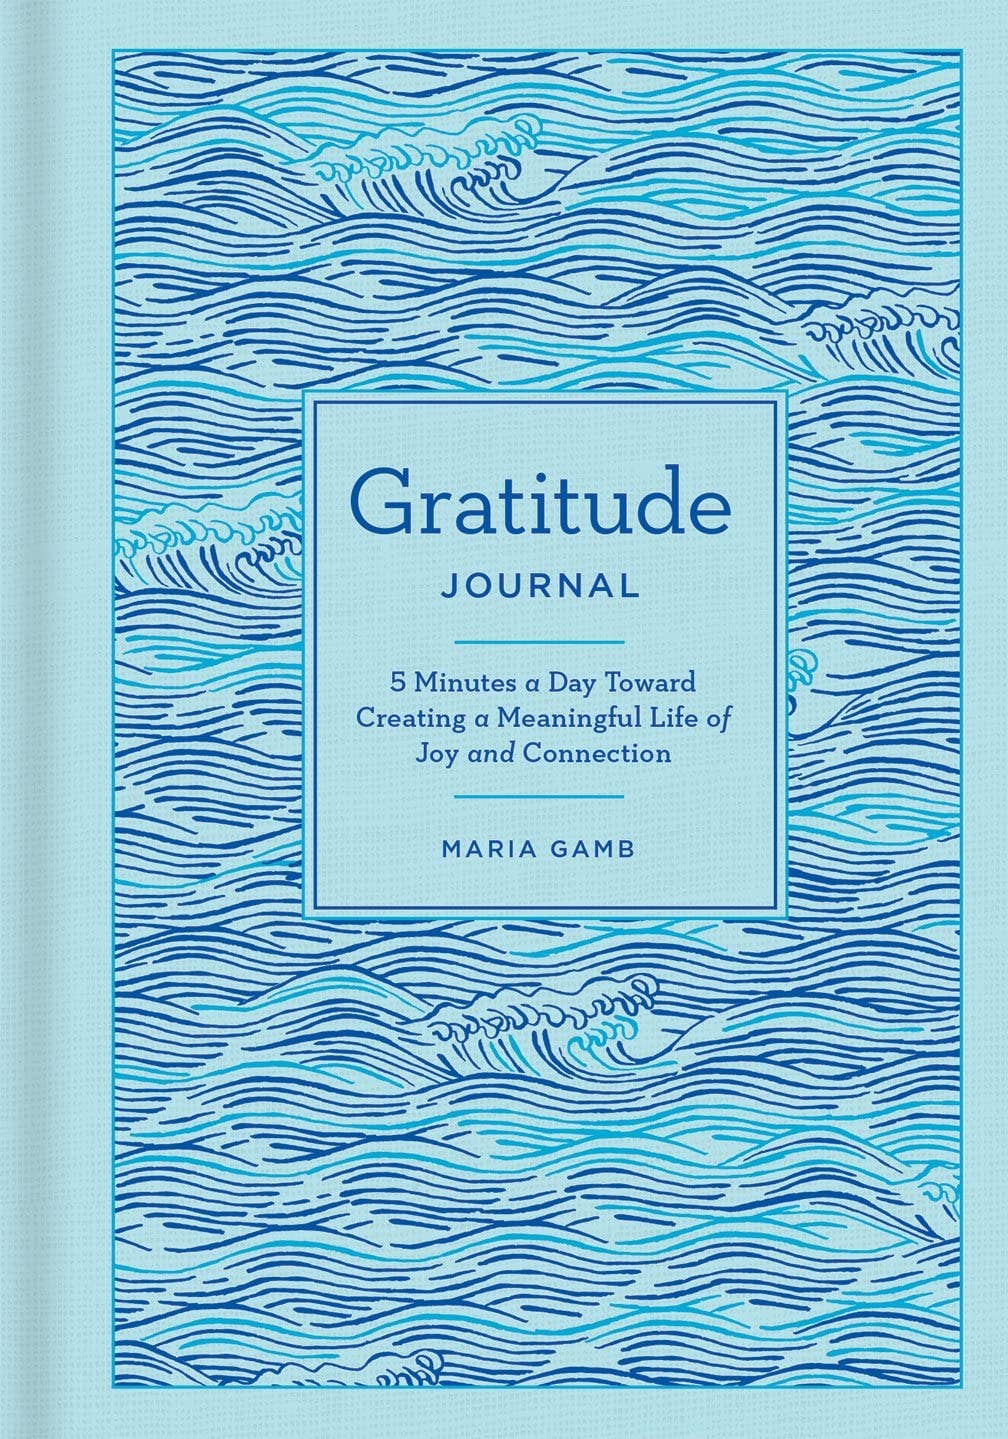 Journal, Gratitude: 5 Minutes a Day Toward a Meaningful Life